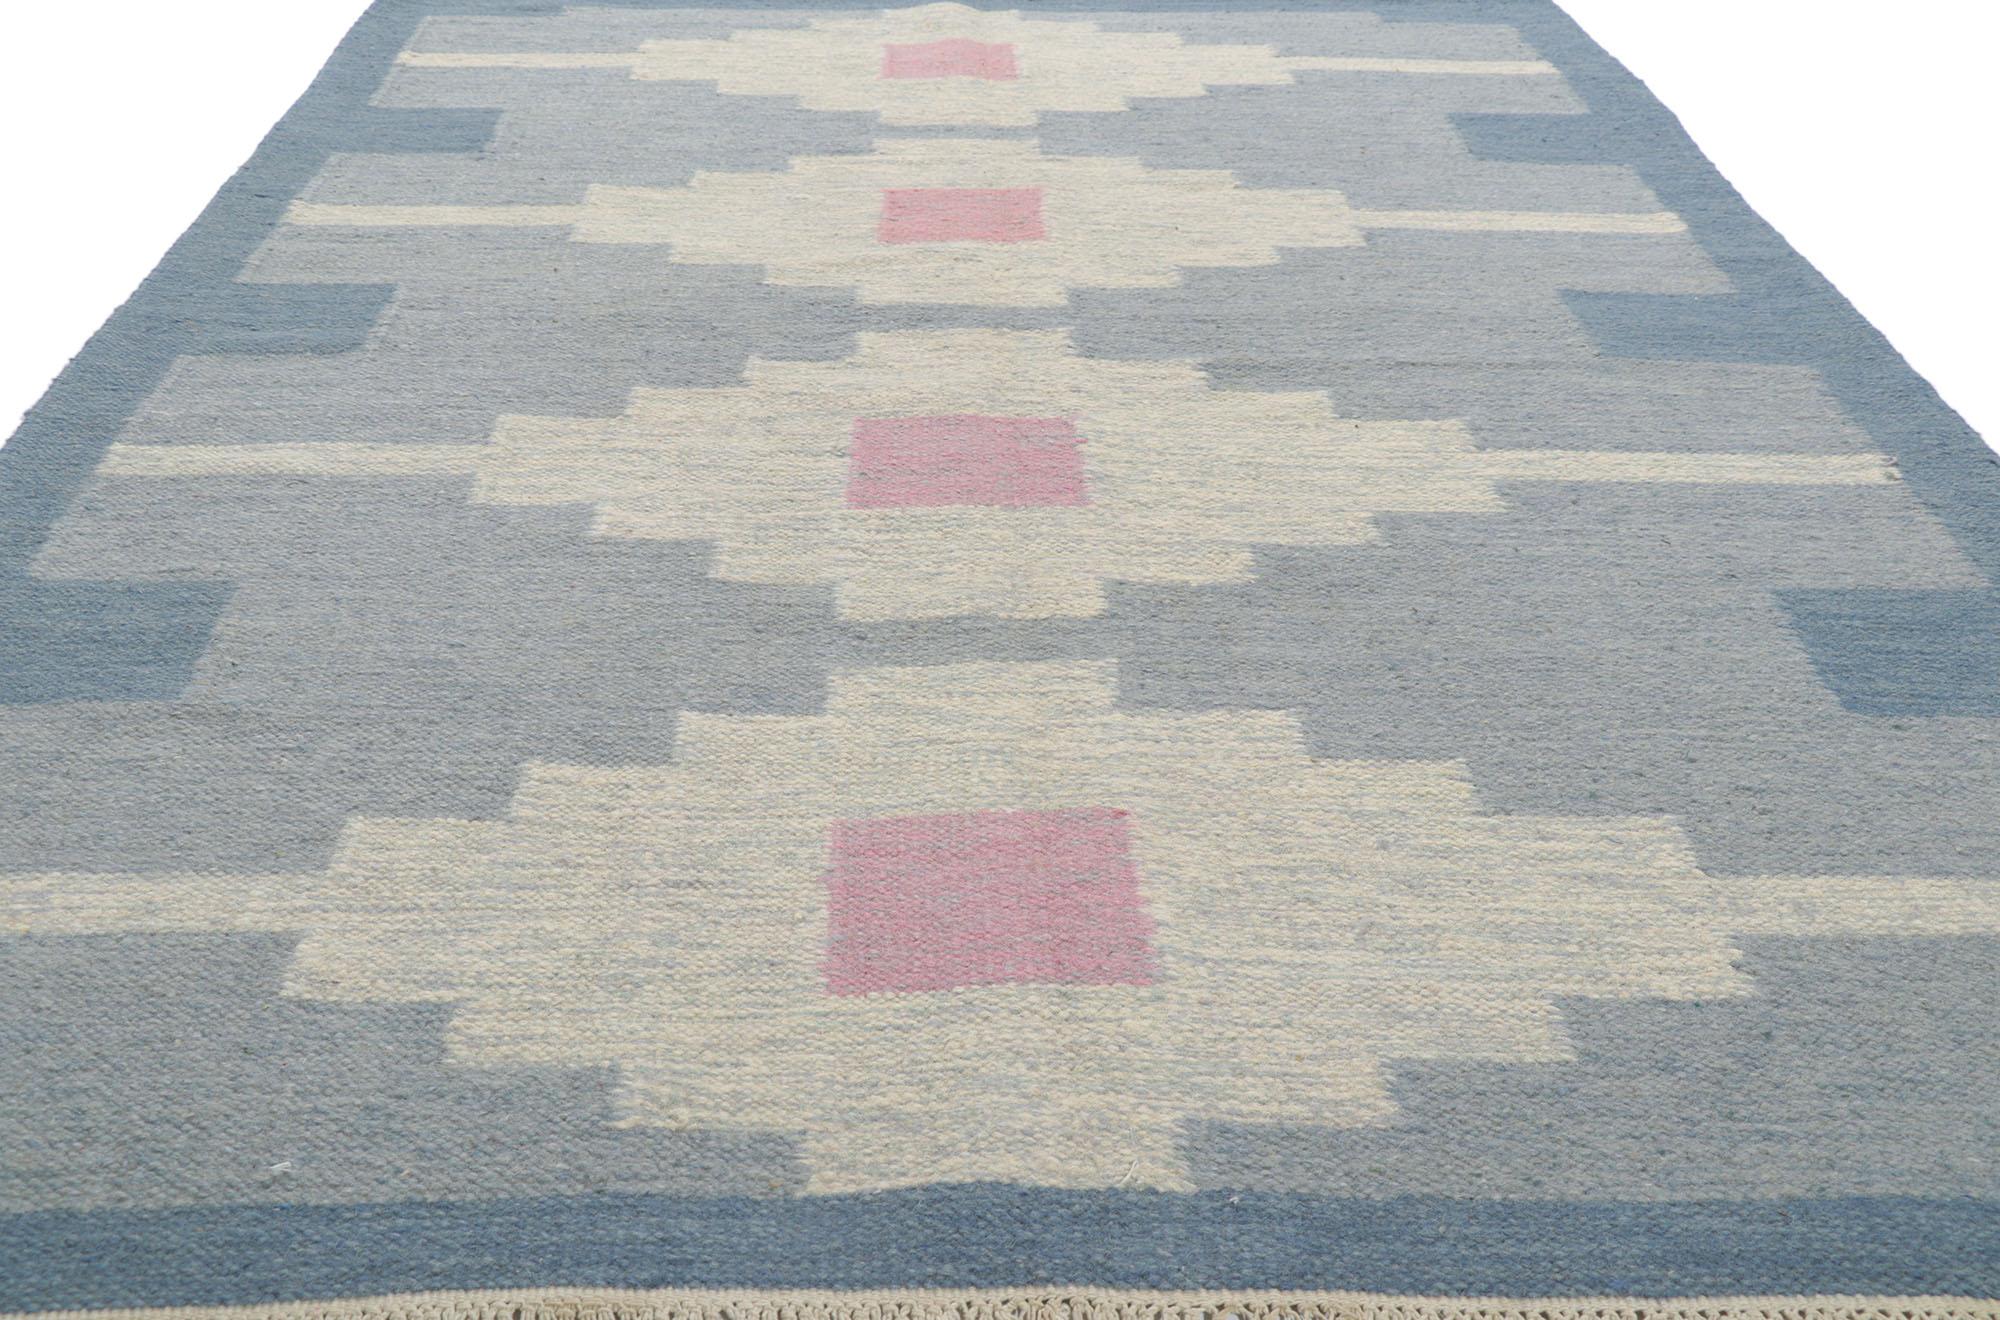 Vintage Swedish Kilim Rollakan Rug with Scandinavian Modern Style In Good Condition For Sale In Dallas, TX